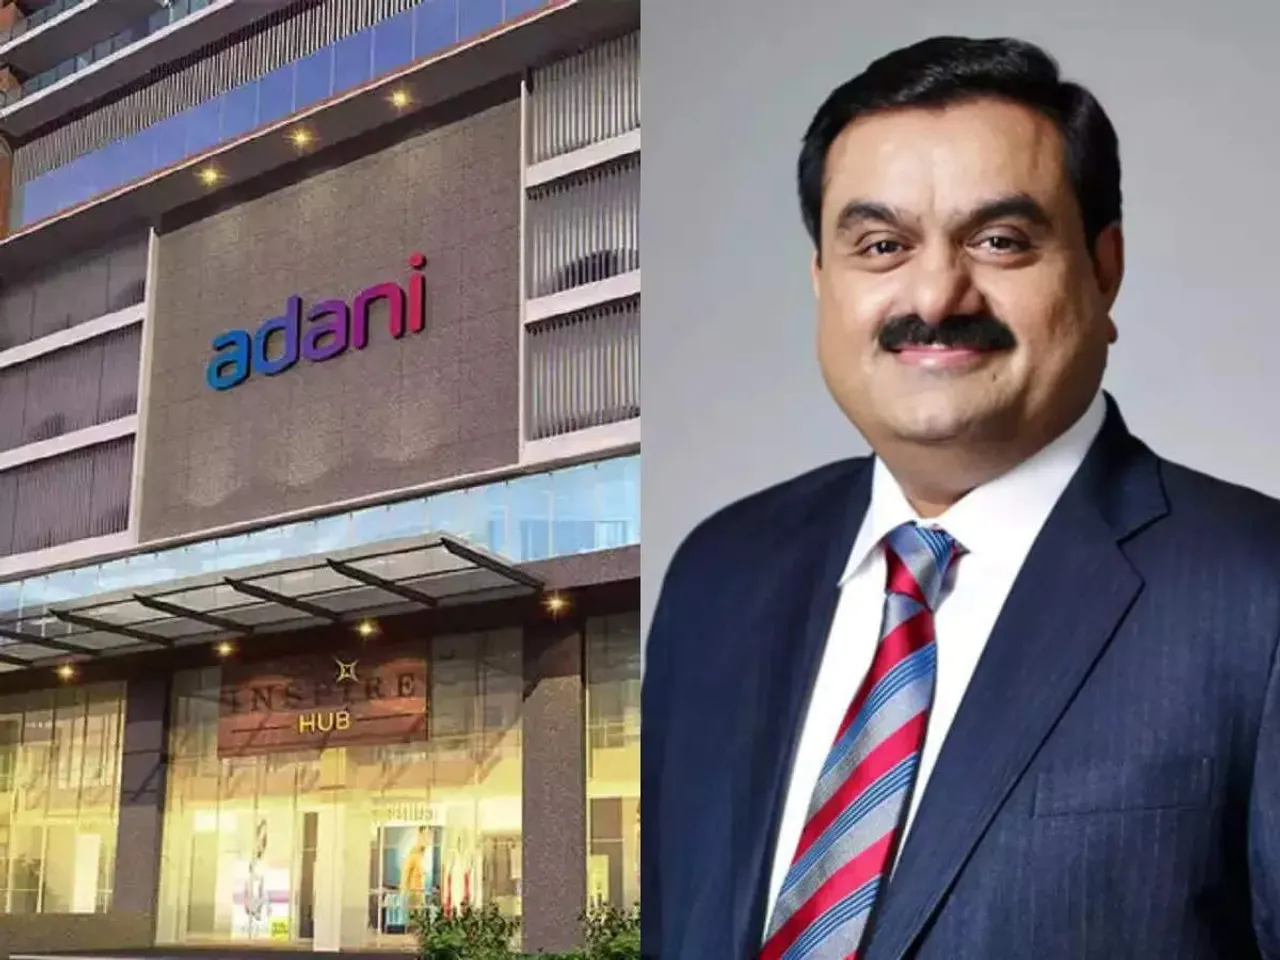 Fraud cannot be obfuscated by nationalism: Hindenburg on Adani response